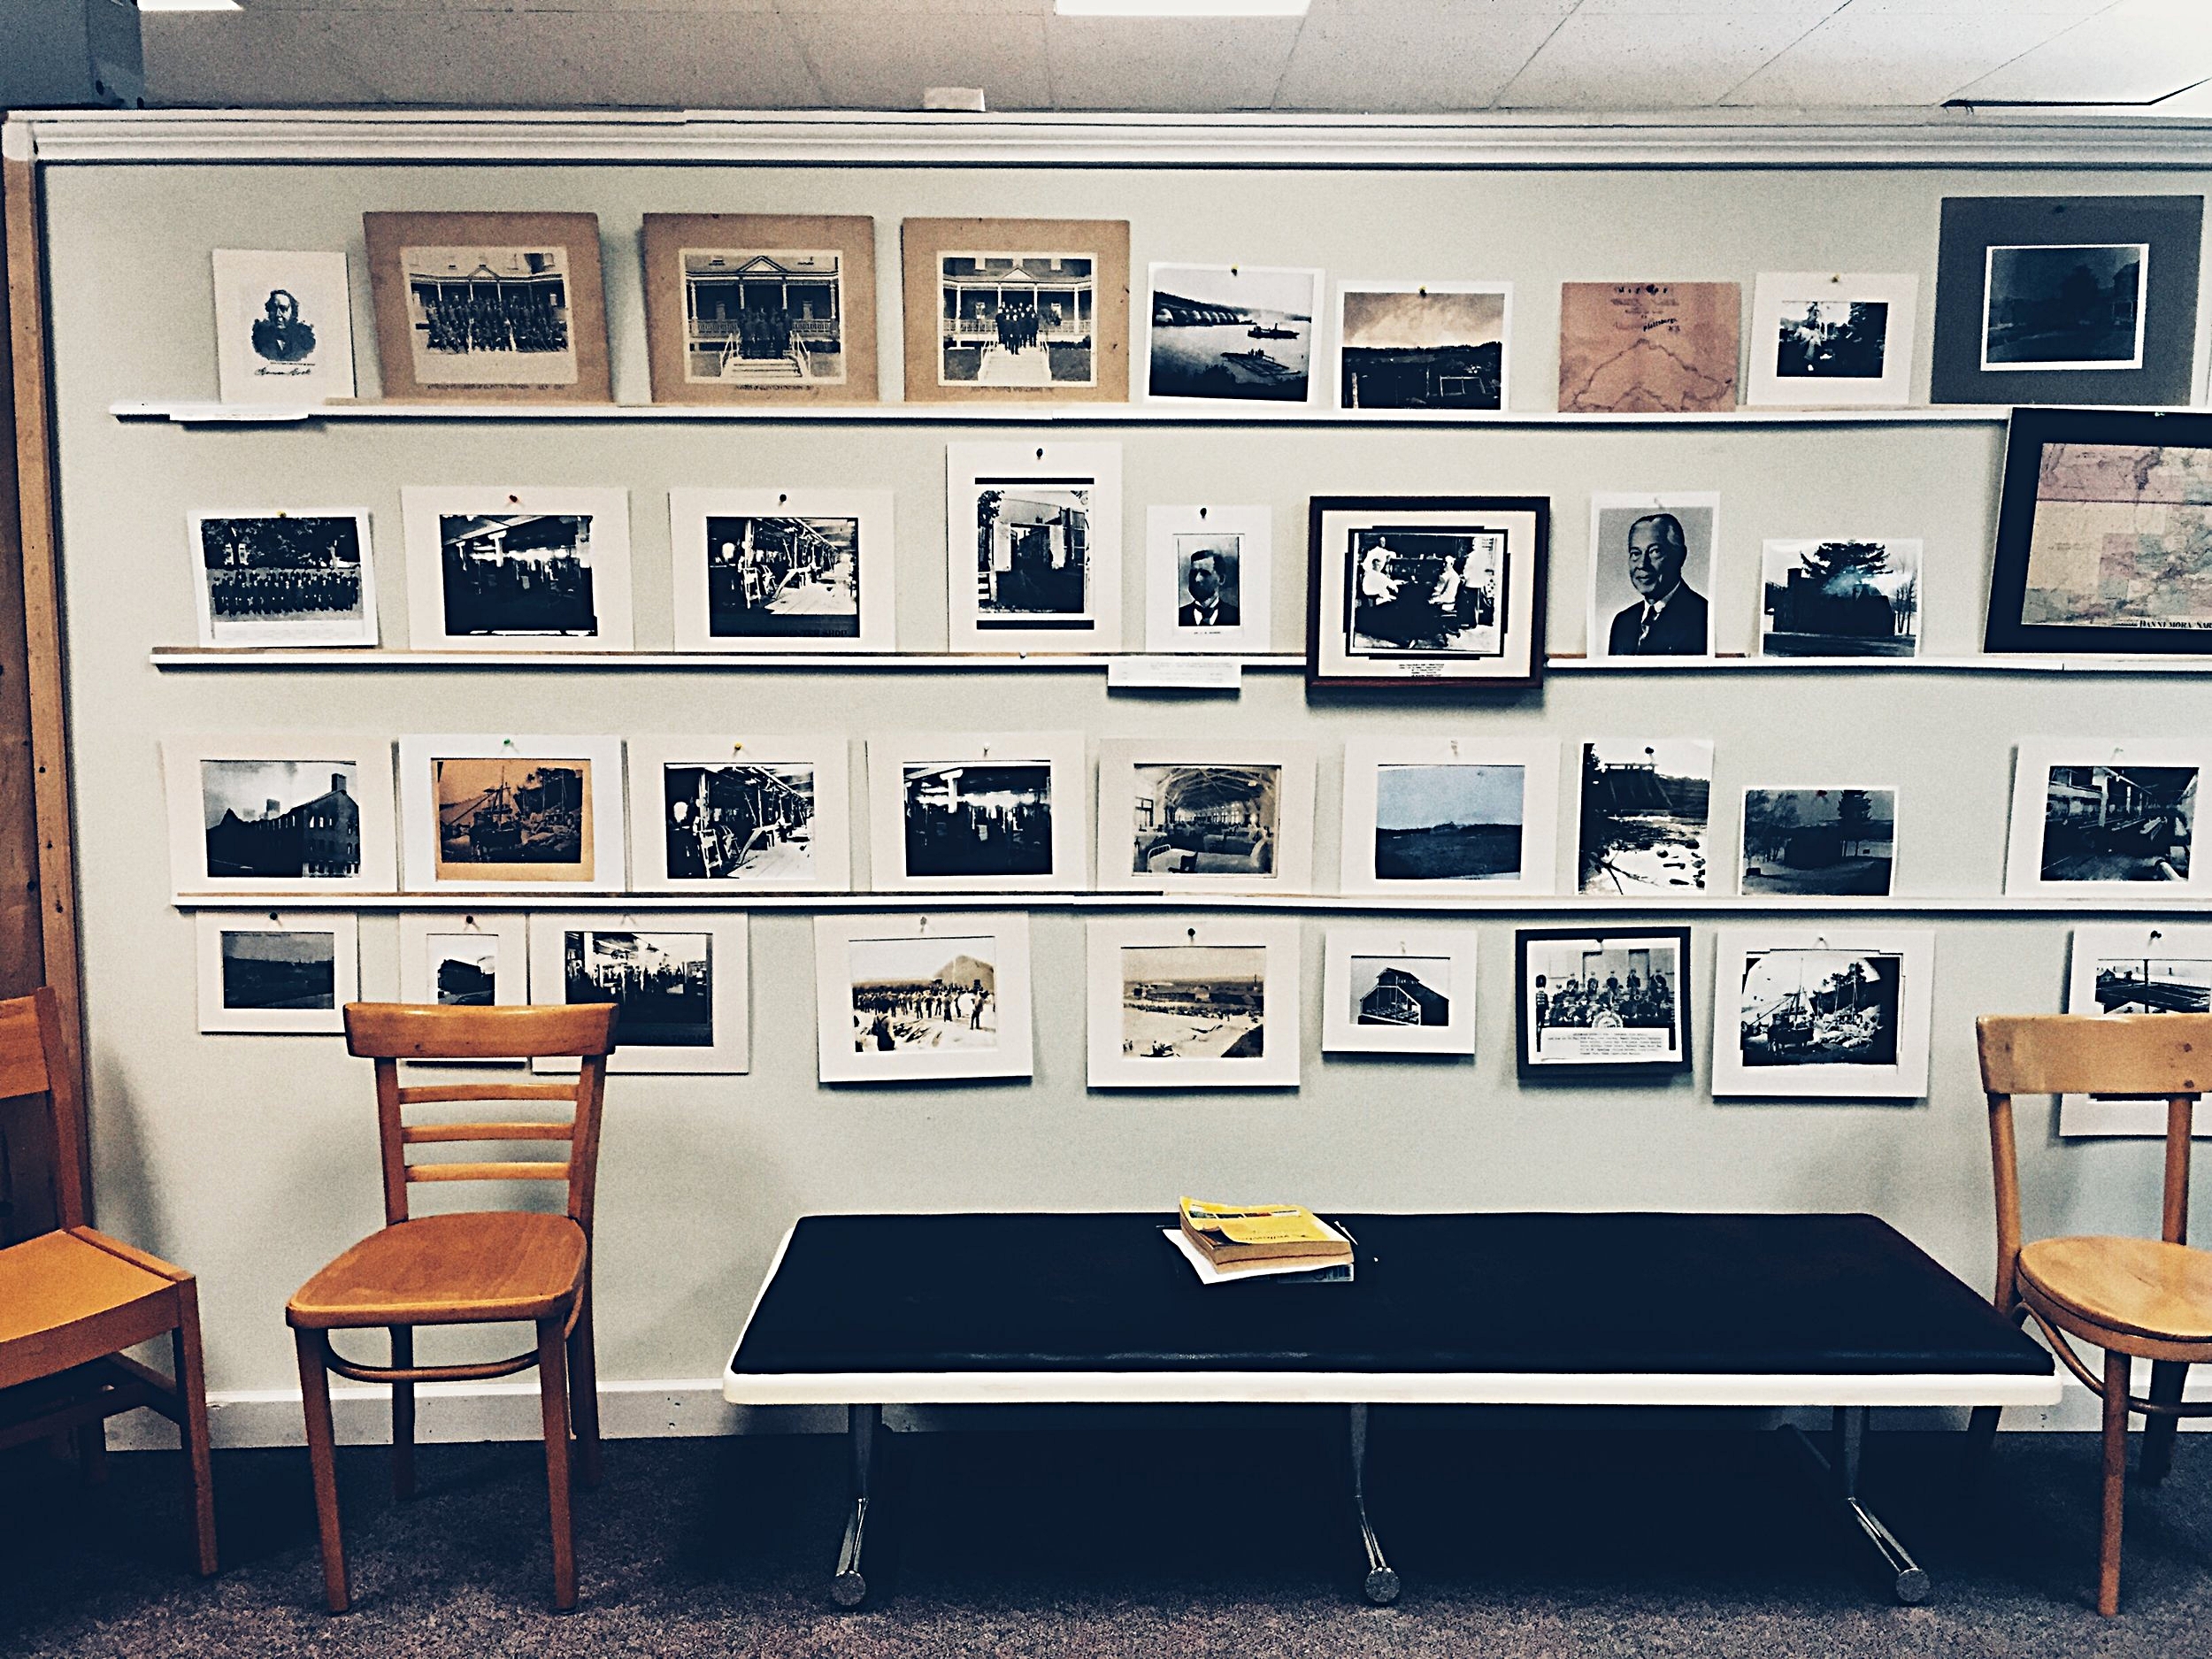  Photographs of Dannemora and Clinton Prison, curated by historian Walter "Pete" Light for the Museum at the Dannemora Free Library.&nbsp; (Chelsia Rose Marcius/August 14, 2016)&nbsp; &nbsp; 